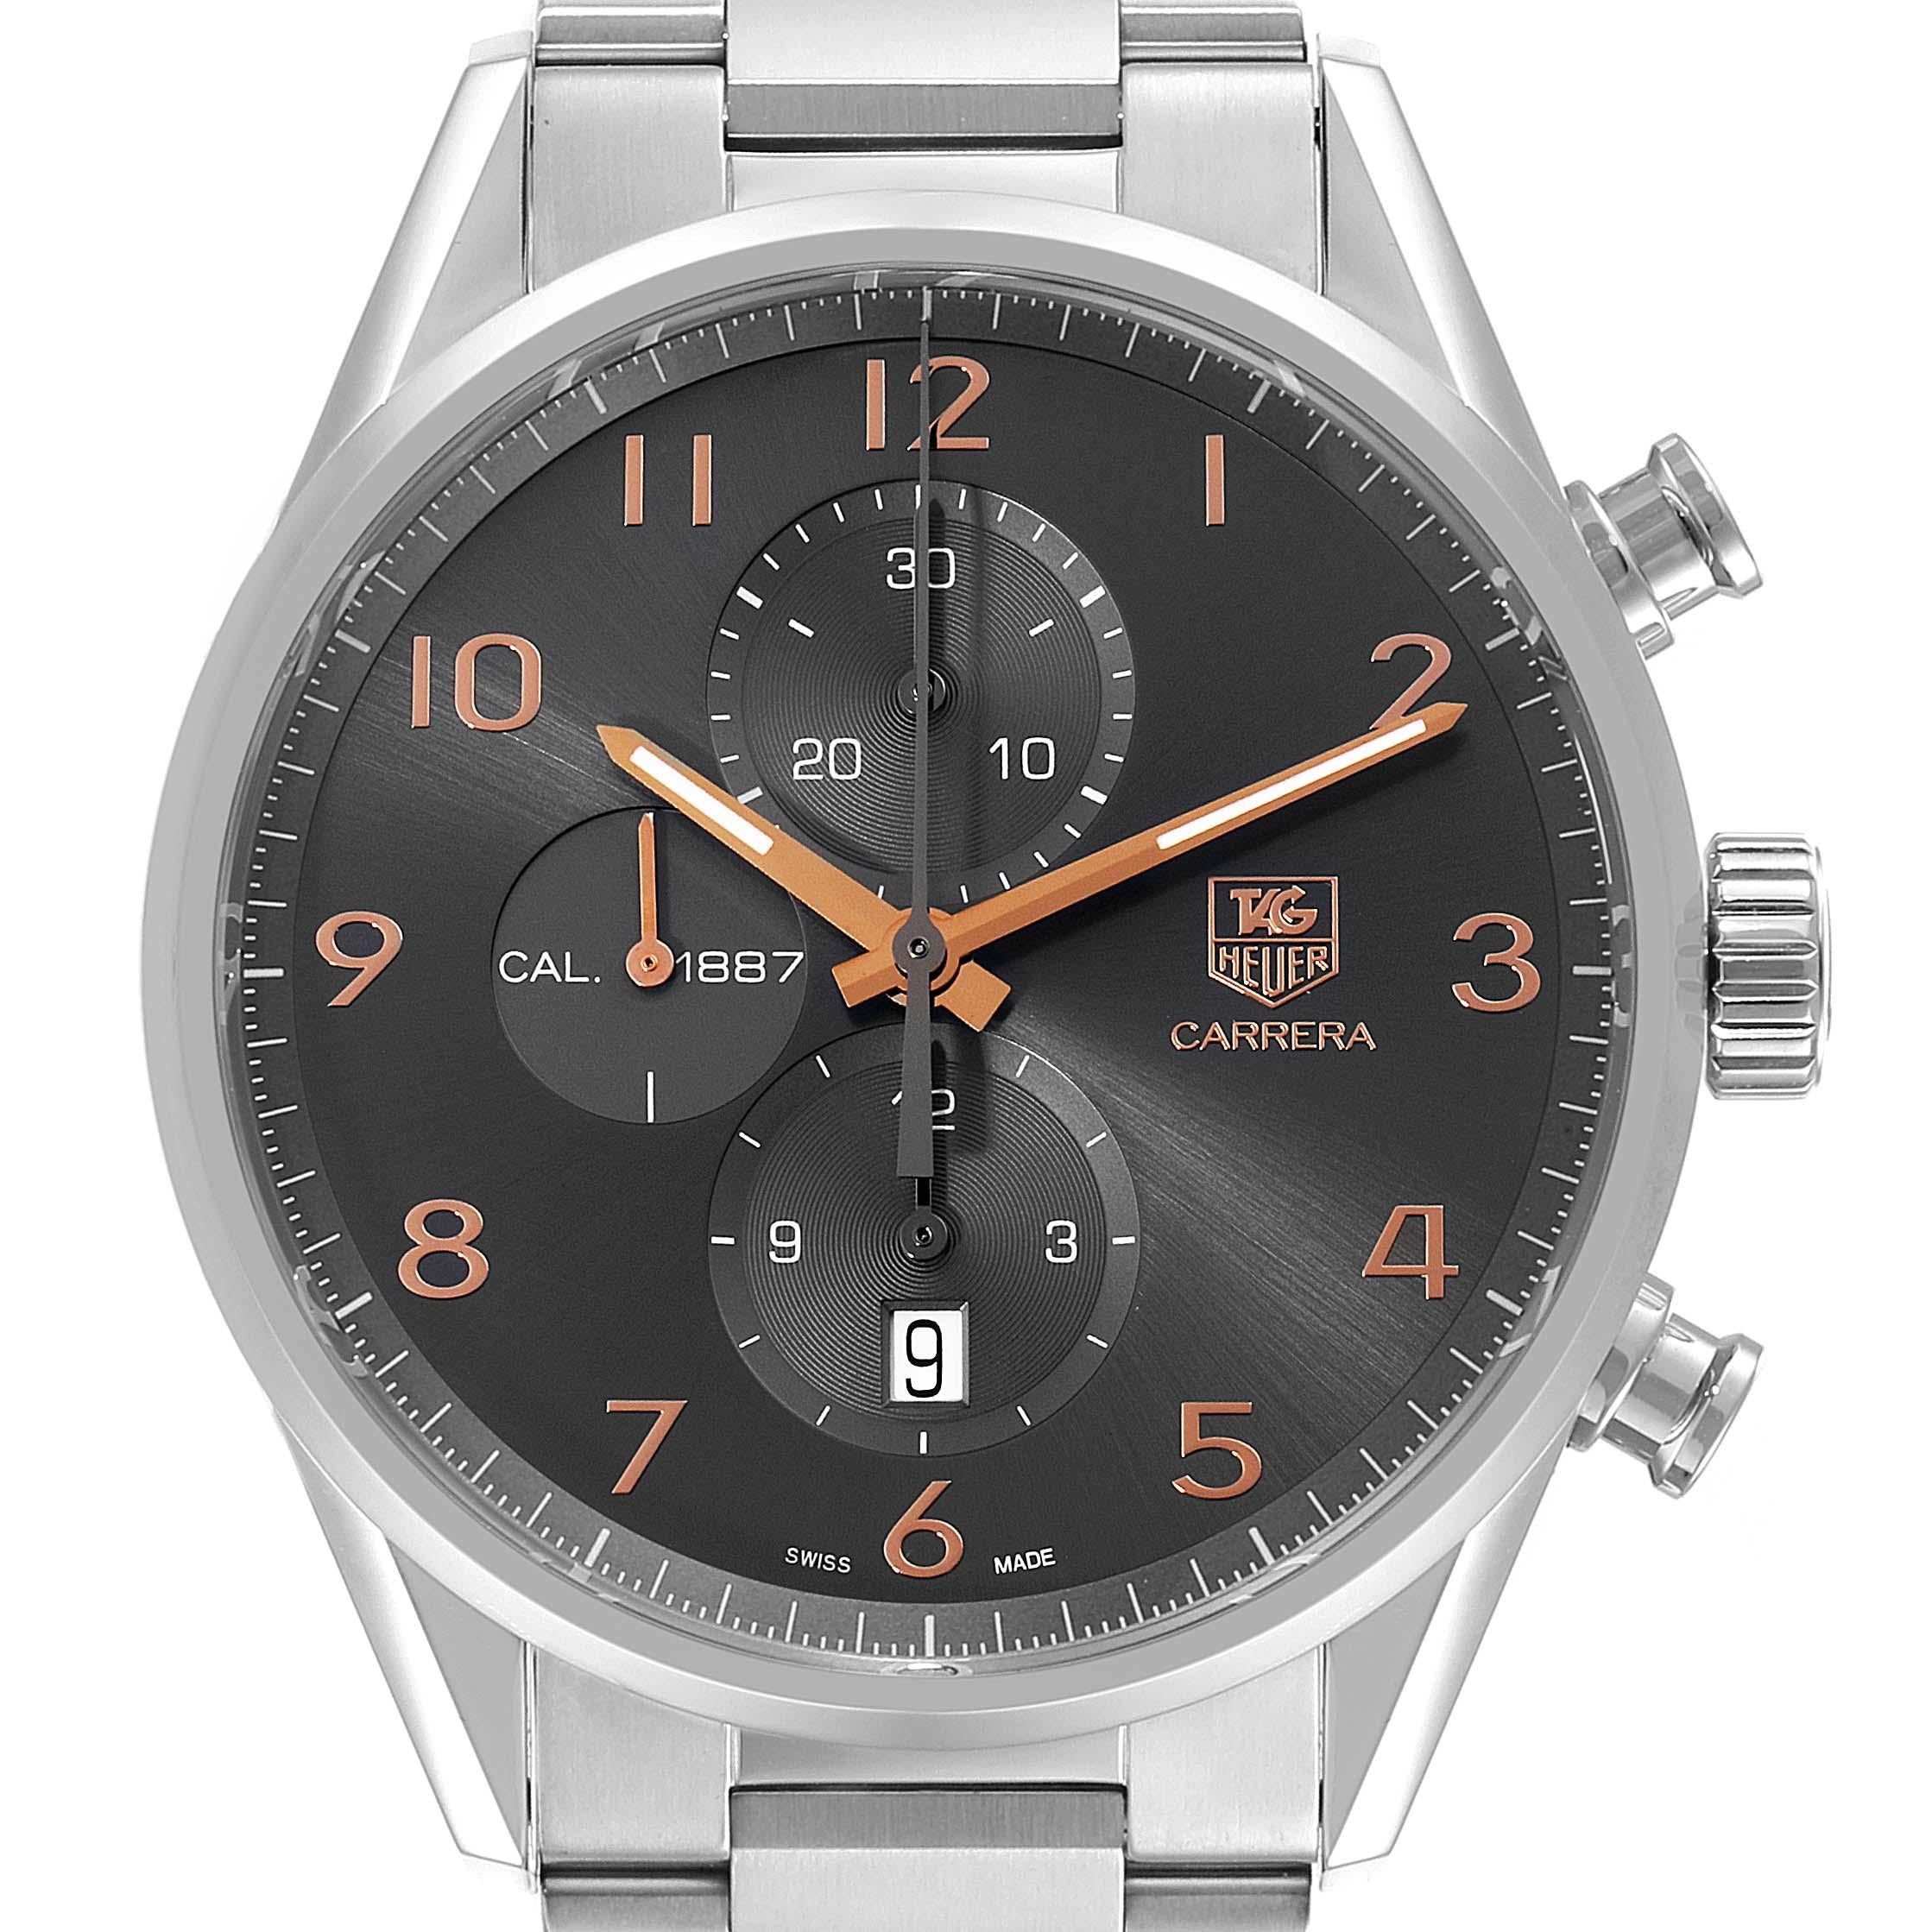 Tag Heuer Carrera 1887 Grey Dial Chronograph Mens Watch CAR2013. Automatic self-winding chronograph movement. Stainless steel case 43.0 mm. Transperent exhibition sapphire crystal case back. Stainless steel smooth bezel. Scratch resistant sapphire